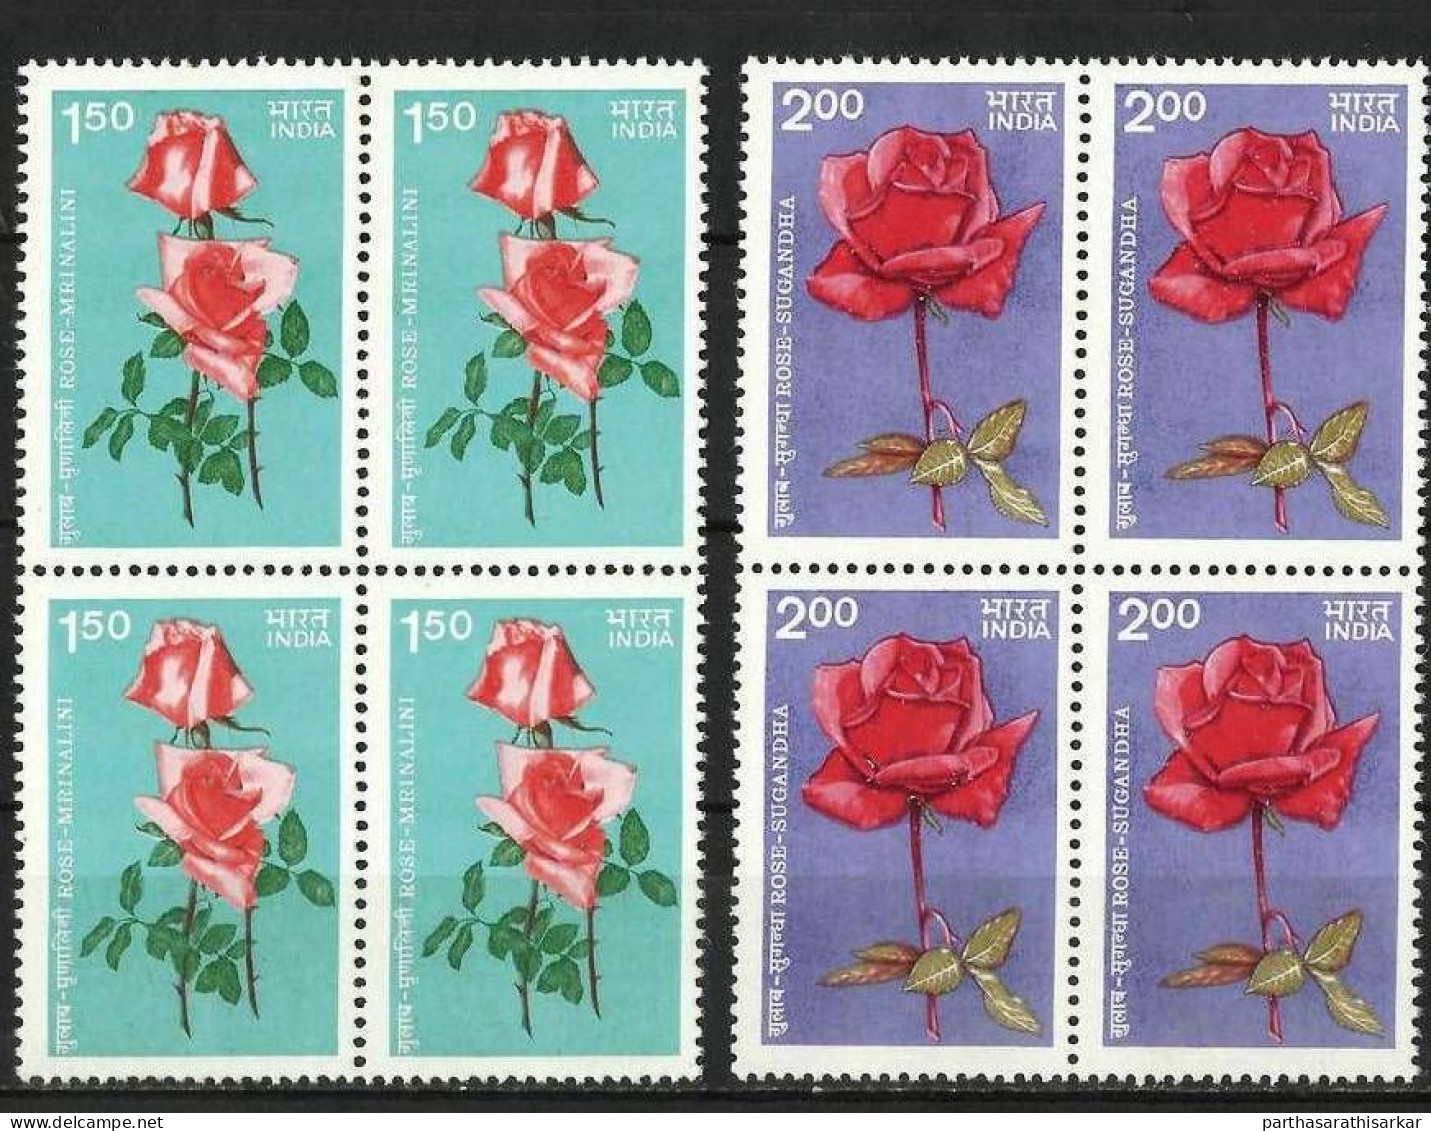 INDIA 1984 ROSES COMPLETE SET BLOCK OF 4 MNH - Nuevos